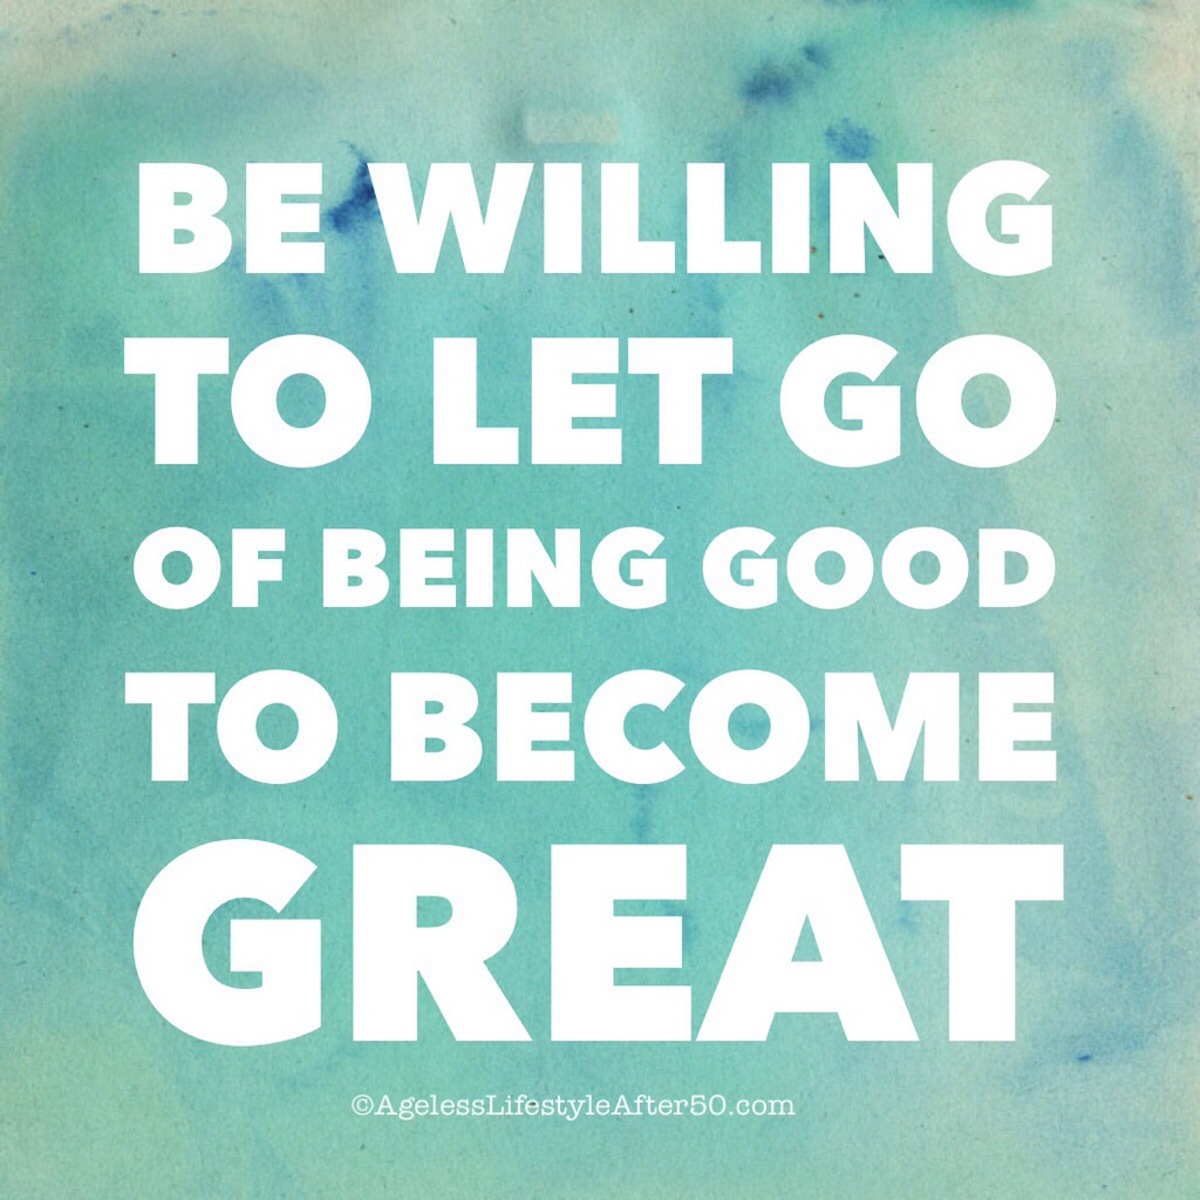 Let Go of Being Good to Become Great